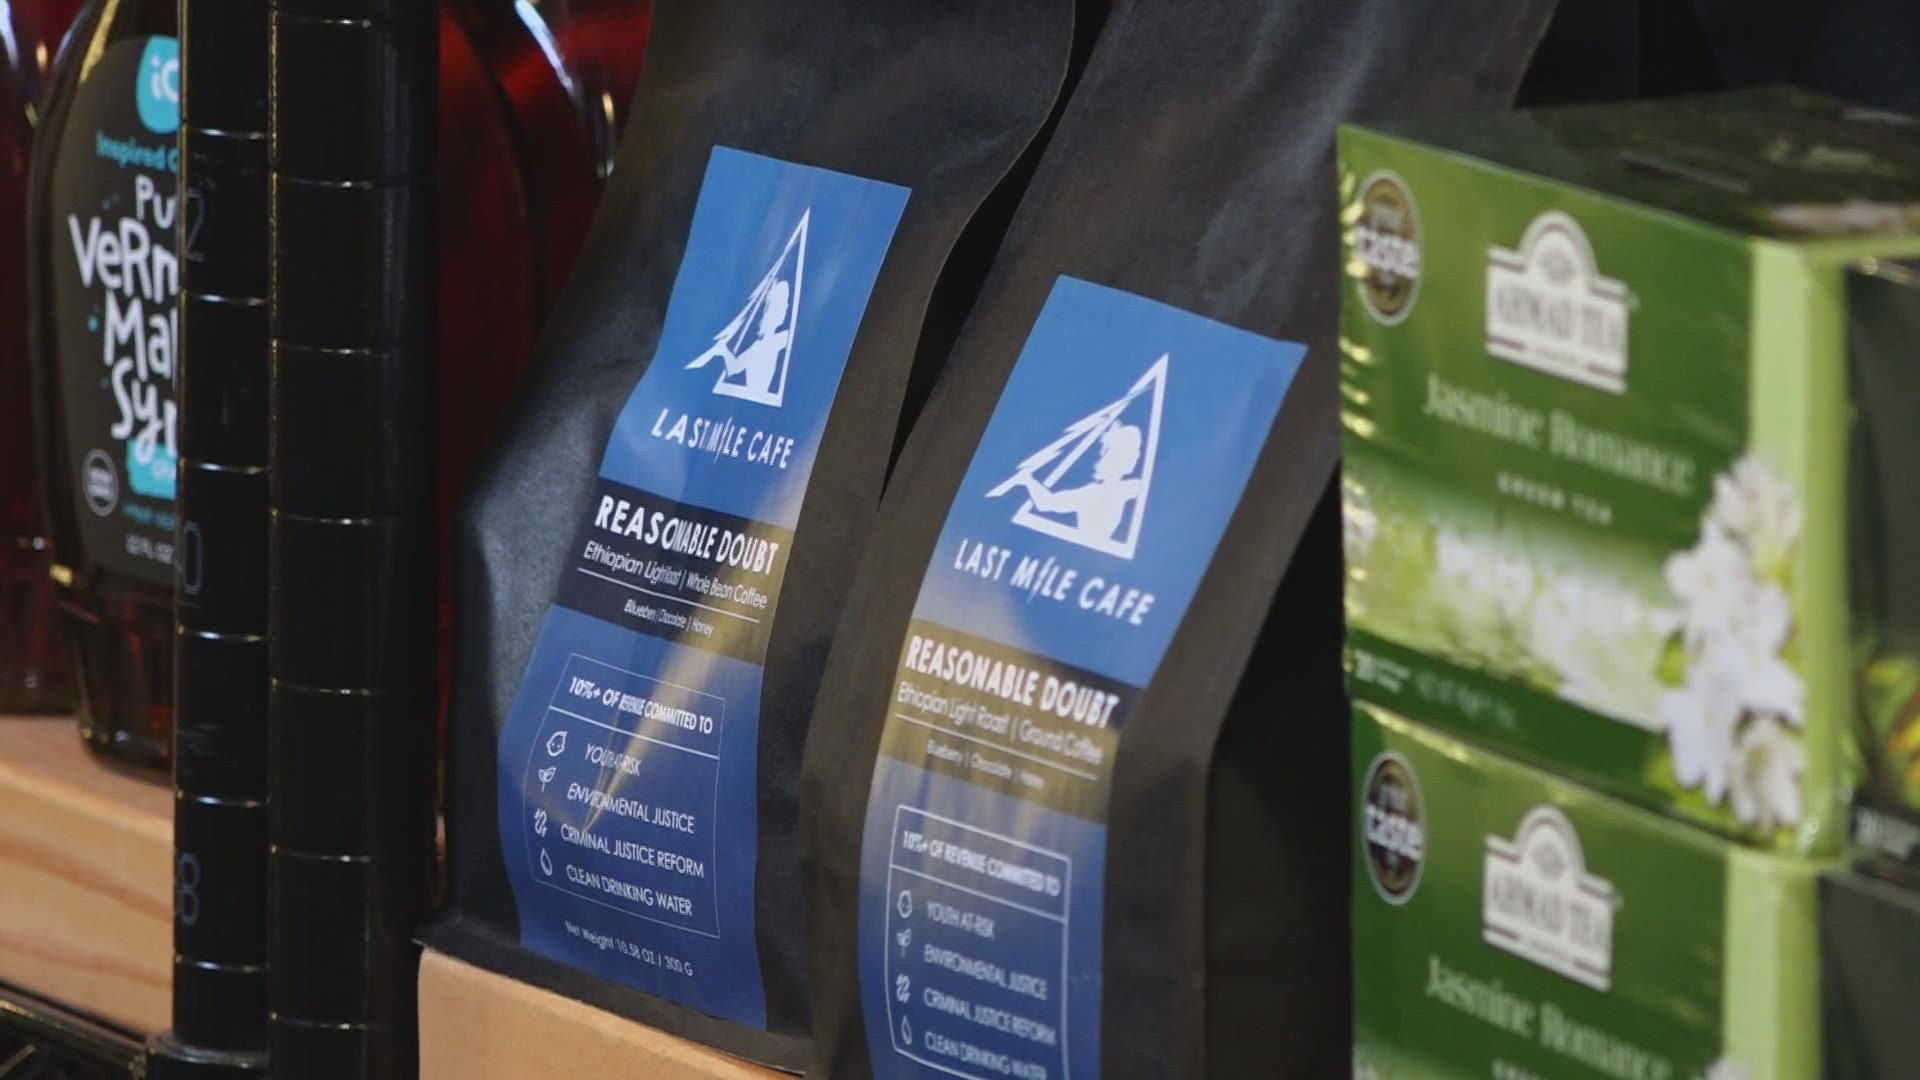 A brand-new small business in Grand Rapids is combining state-of-the-art technology and sustainability to bring you delicious coffee.